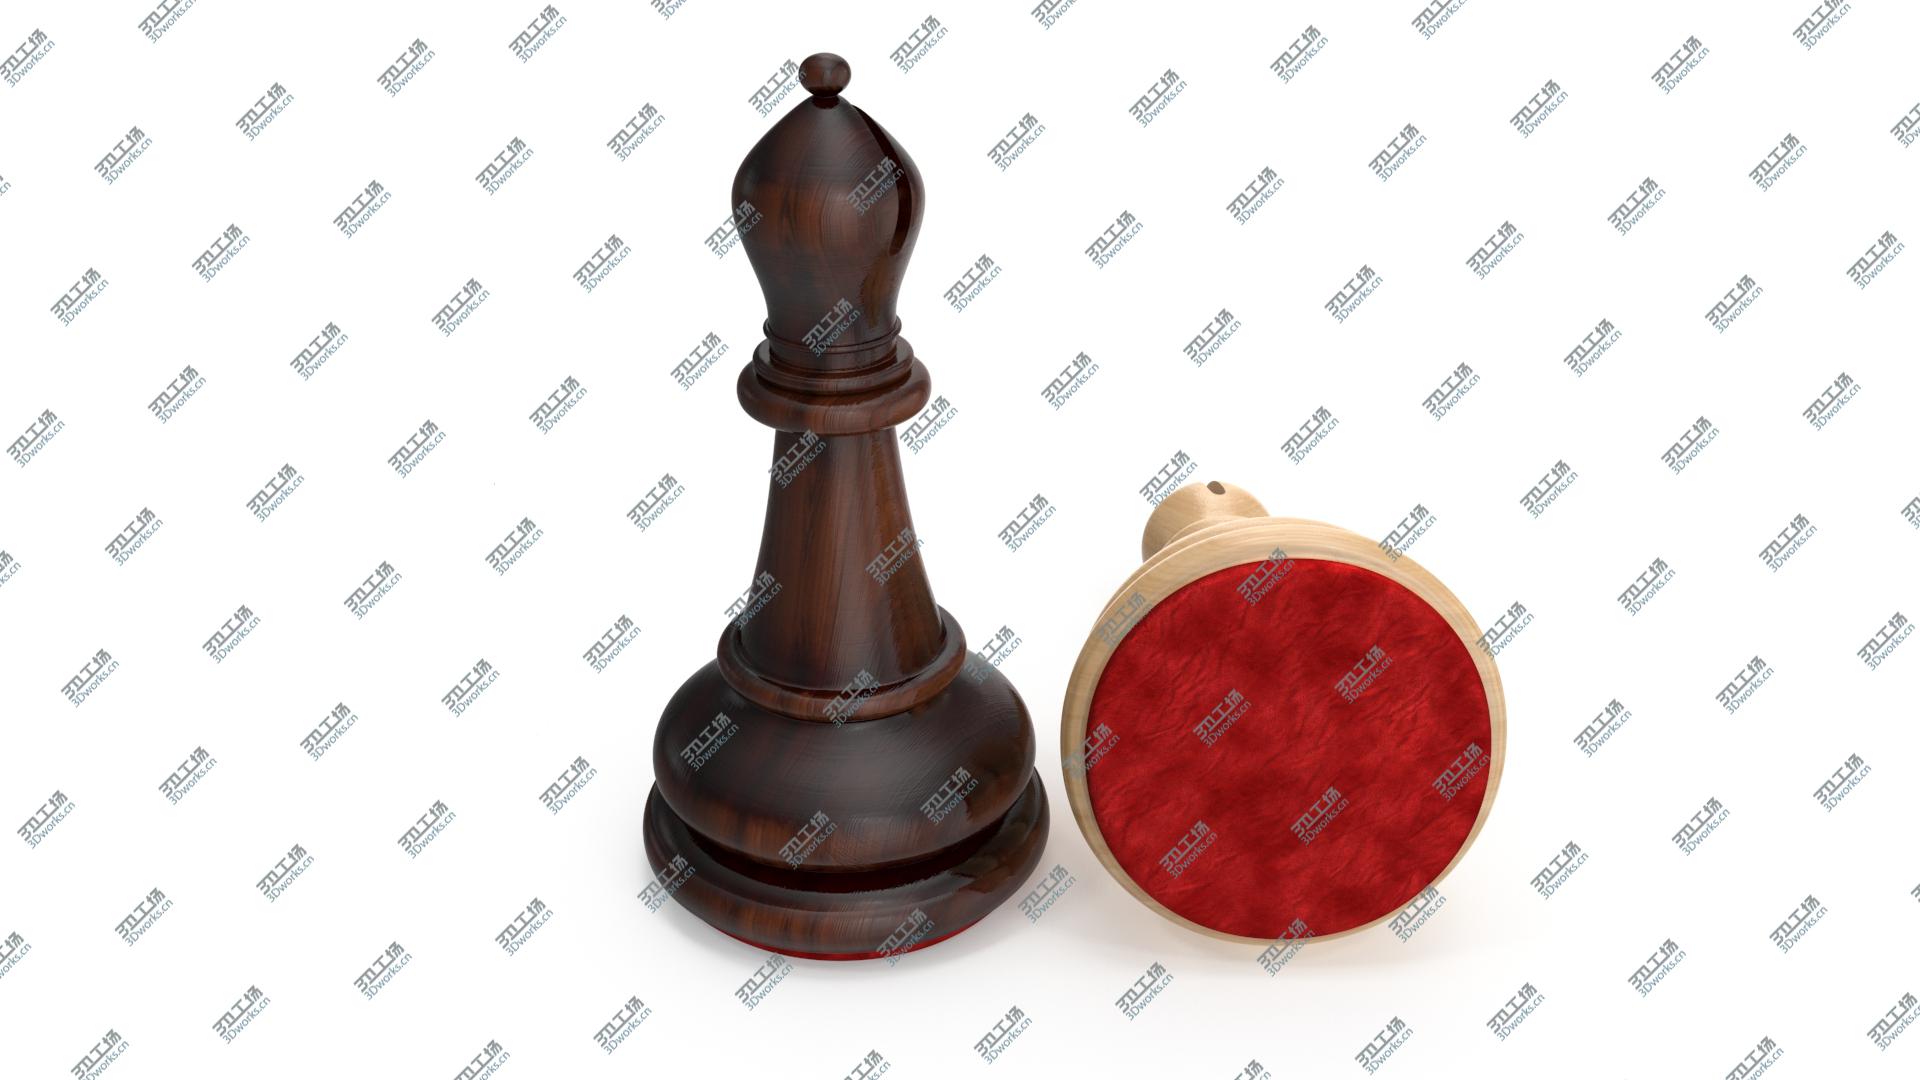 images/goods_img/2021040162/3D Bishop Chess Piece/5.jpg